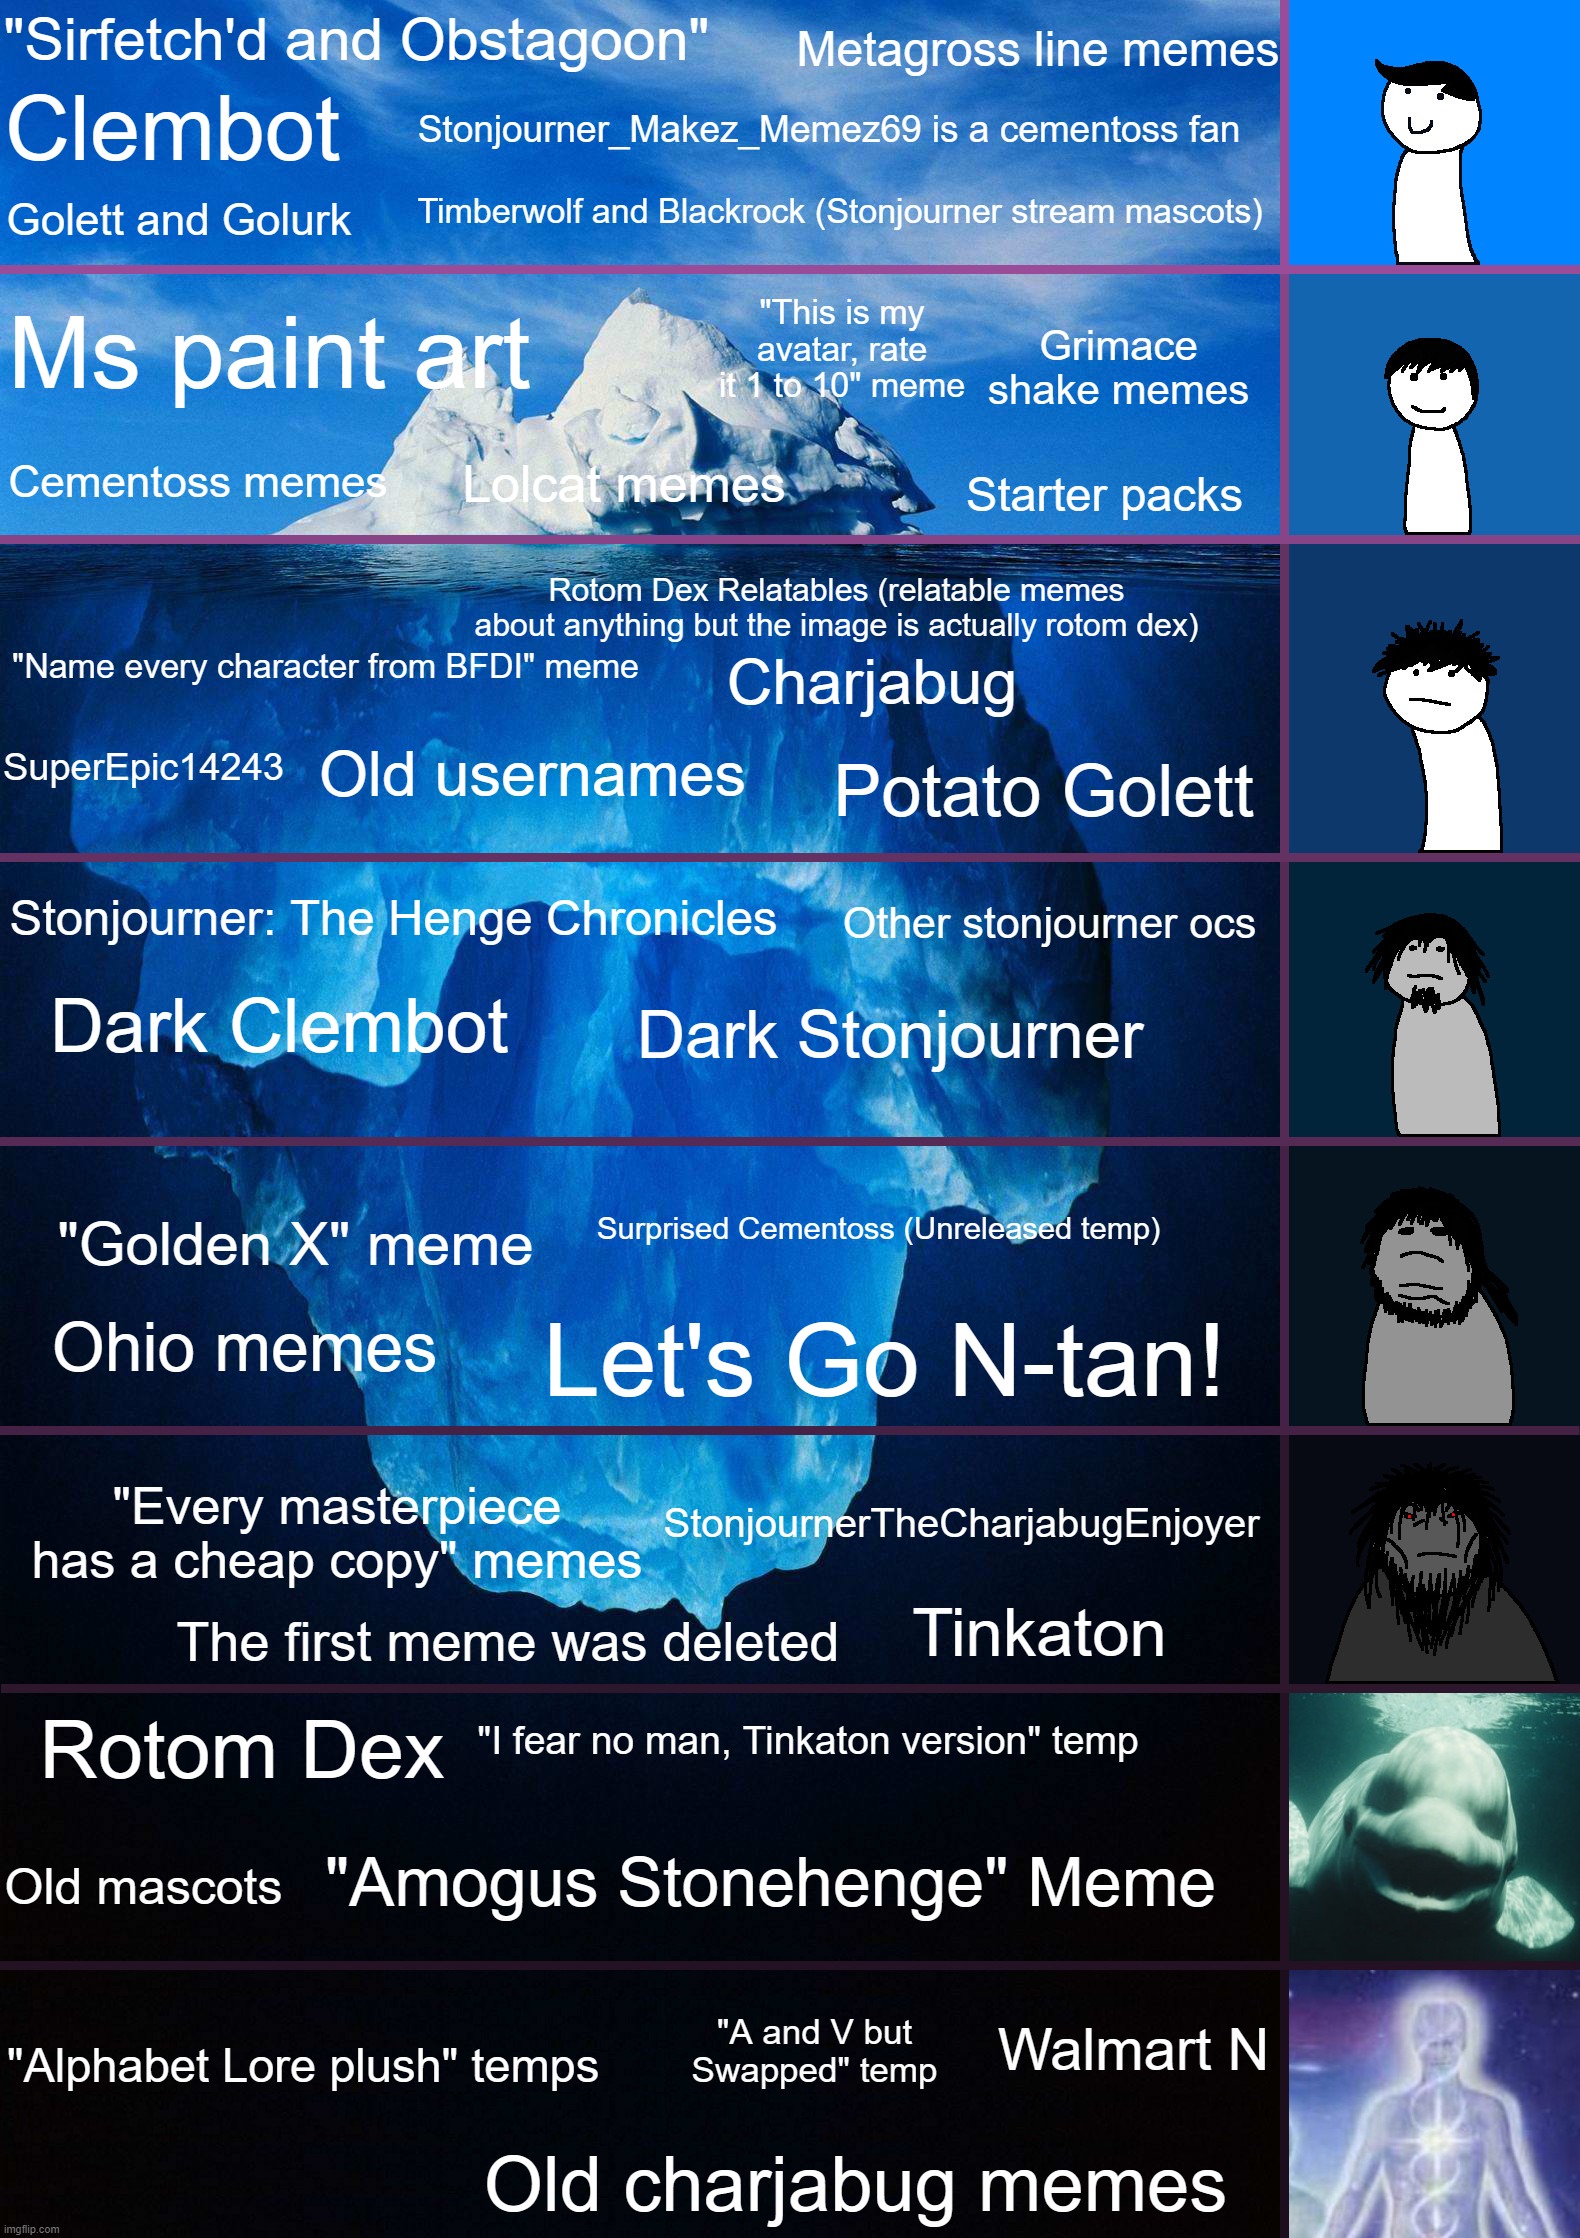 The Stonjourner_Makez_Memez69 Iceberg | "Sirfetch'd and Obstagoon"; Metagross line memes; Clembot; Stonjourner_Makez_Memez69 is a cementoss fan; Timberwolf and Blackrock (Stonjourner stream mascots); Golett and Golurk; Grimace shake memes; "This is my avatar, rate it 1 to 10" meme; Ms paint art; Cementoss memes; Lolcat memes; Starter packs; Rotom Dex Relatables (relatable memes about anything but the image is actually rotom dex); "Name every character from BFDI" meme; Charjabug; Old usernames; SuperEpic14243; Potato Golett; Stonjourner: The Henge Chronicles; Other stonjourner ocs; Dark Clembot; Dark Stonjourner; Surprised Cementoss (Unreleased temp); "Golden X" meme; Let's Go N-tan! Ohio memes; "Every masterpiece has a cheap copy" memes; StonjournerTheCharjabugEnjoyer; Tinkaton; The first meme was deleted; "I fear no man, Tinkaton version" temp; Rotom Dex; "Amogus Stonehenge" Meme; Old mascots; "A and V but Swapped" temp; "Alphabet Lore plush" temps; Walmart N; Old charjabug memes | image tagged in iceberg levels tiers | made w/ Imgflip meme maker